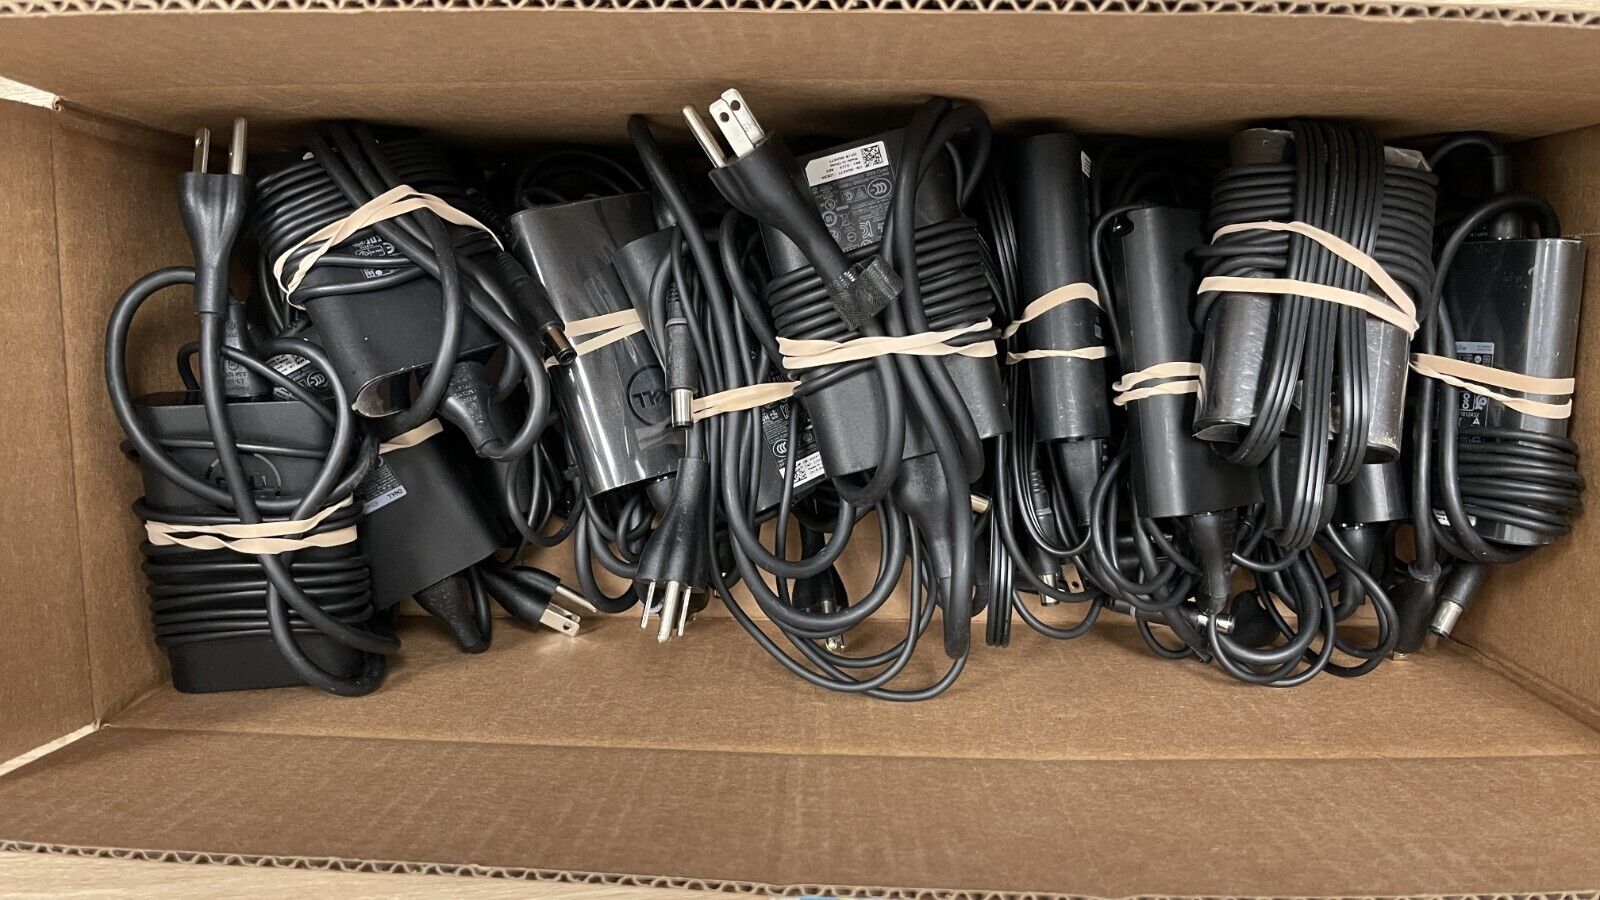 LOT of 20x Dell 0G4X7T 65W AC Laptop Chargers - large barrel